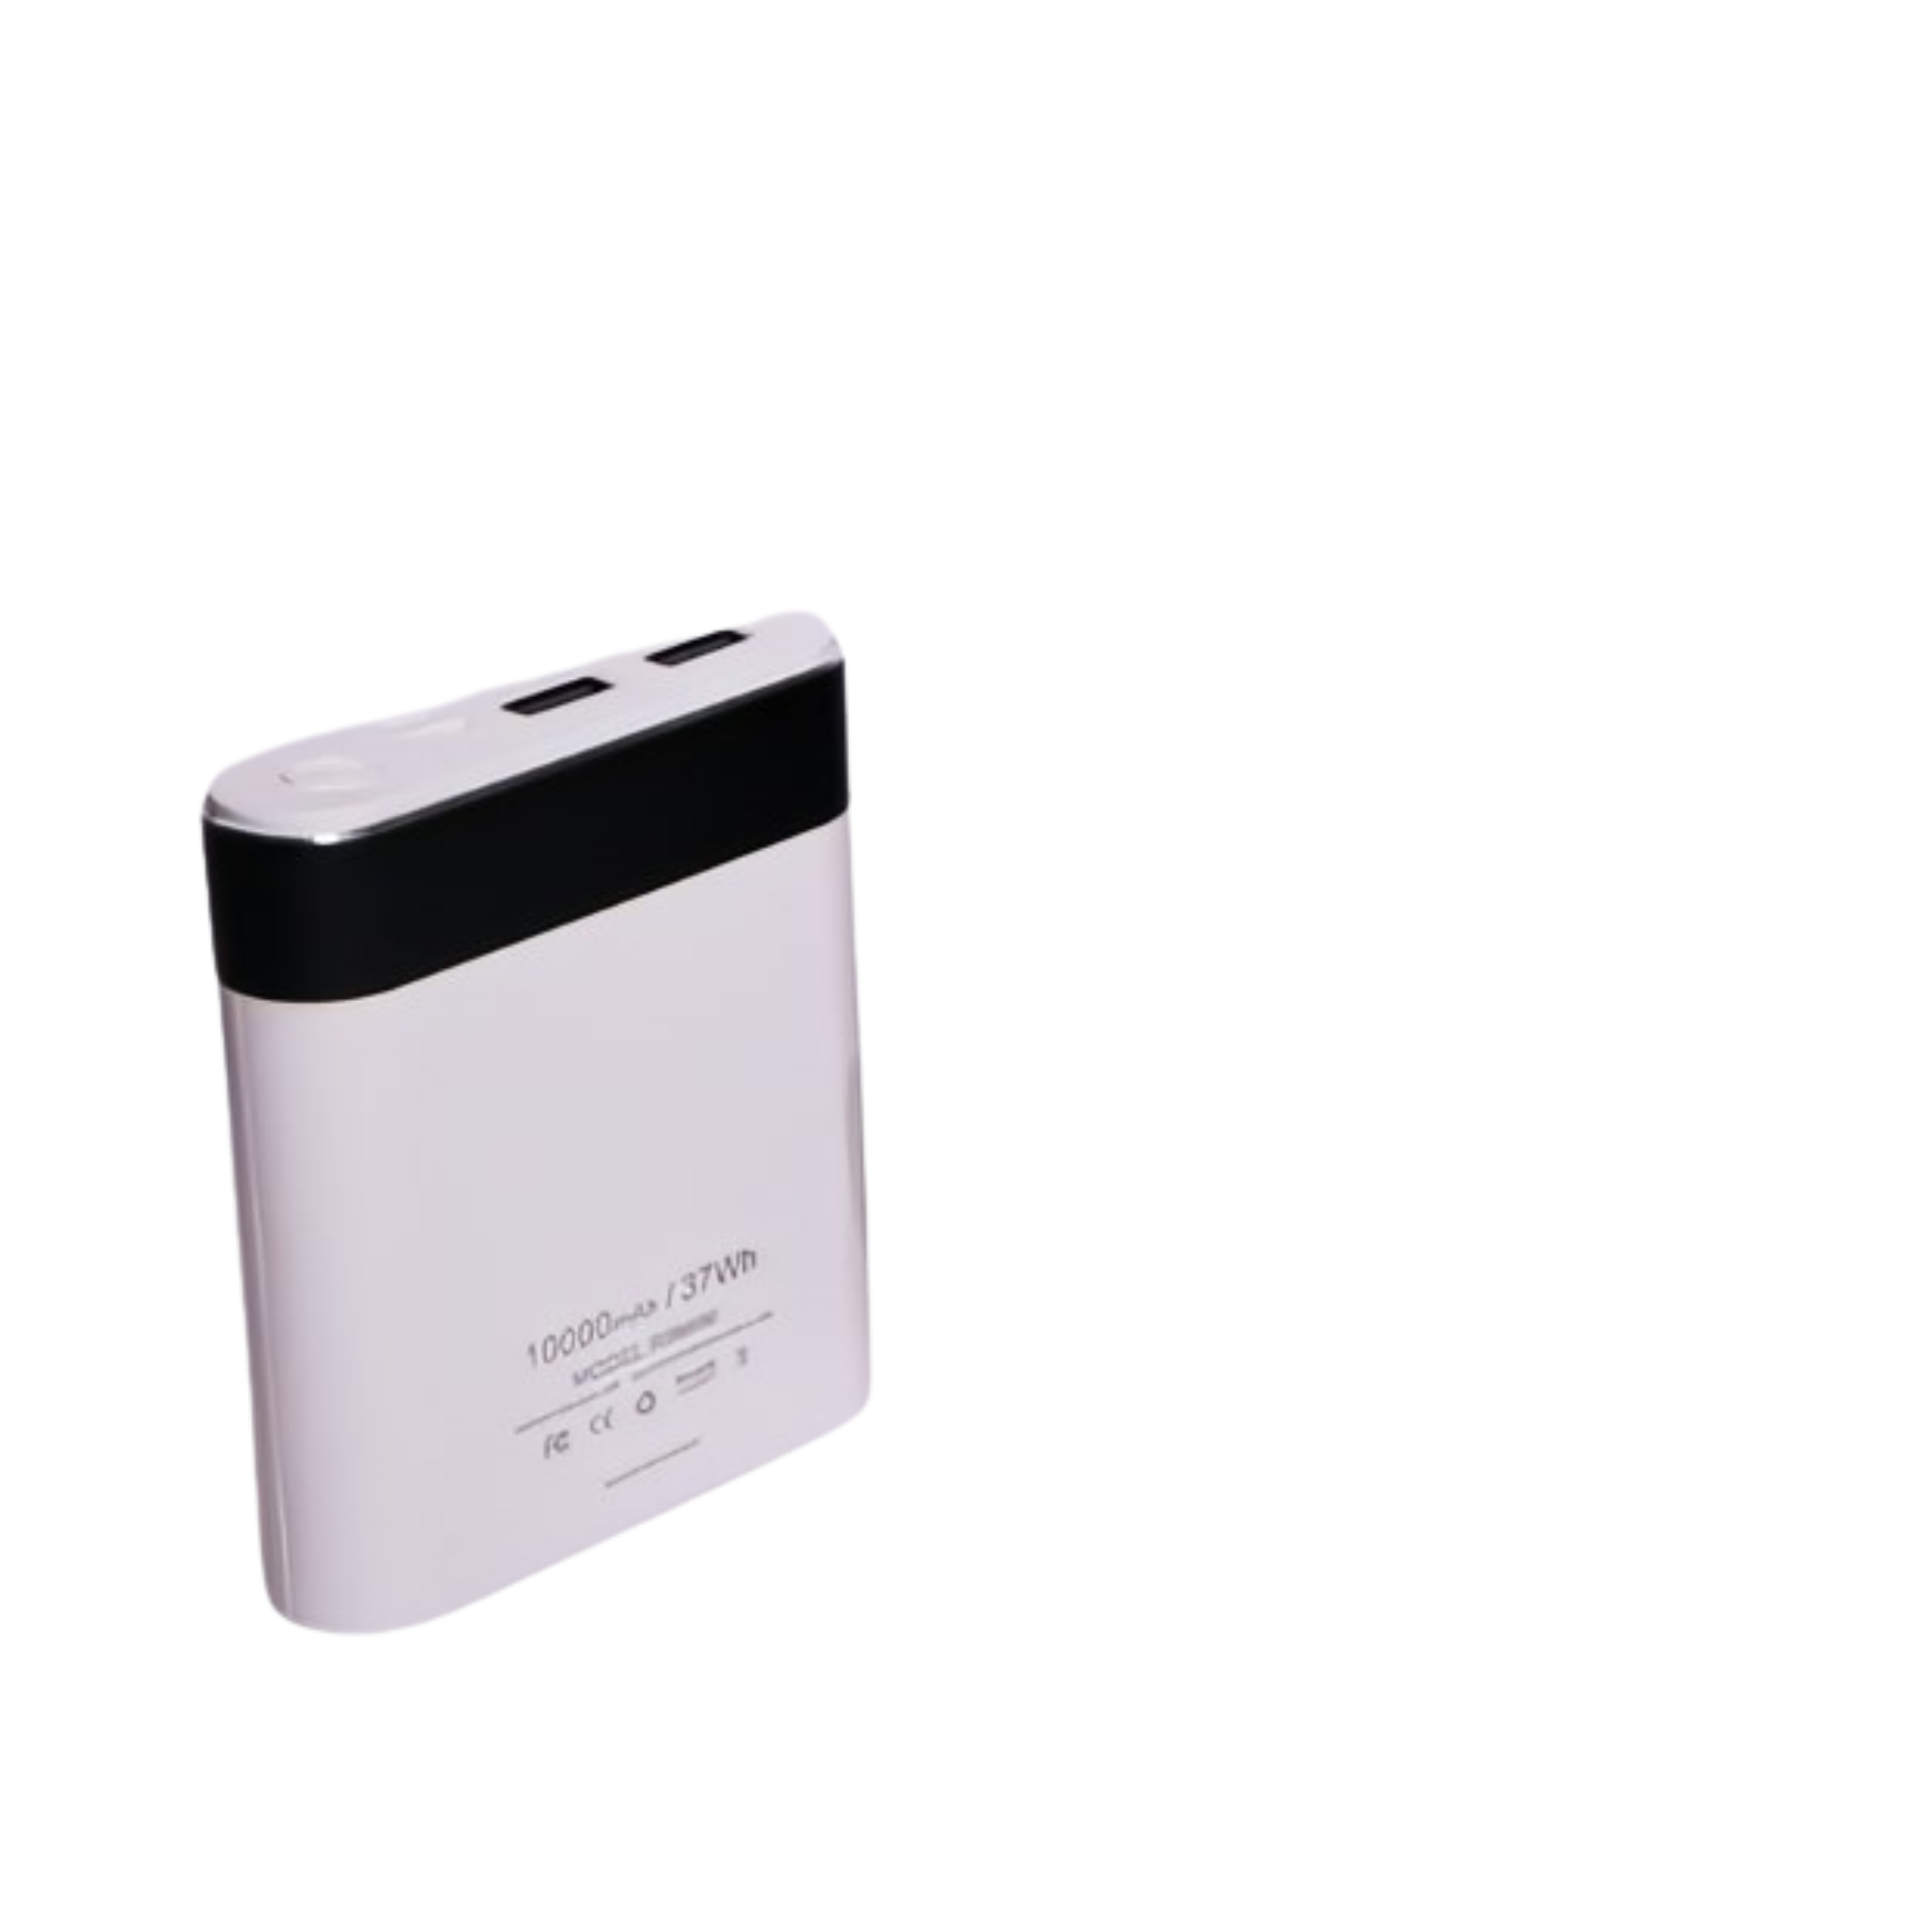 Power Bank, R9 Branded, 2 USB Port, with Charging Cable